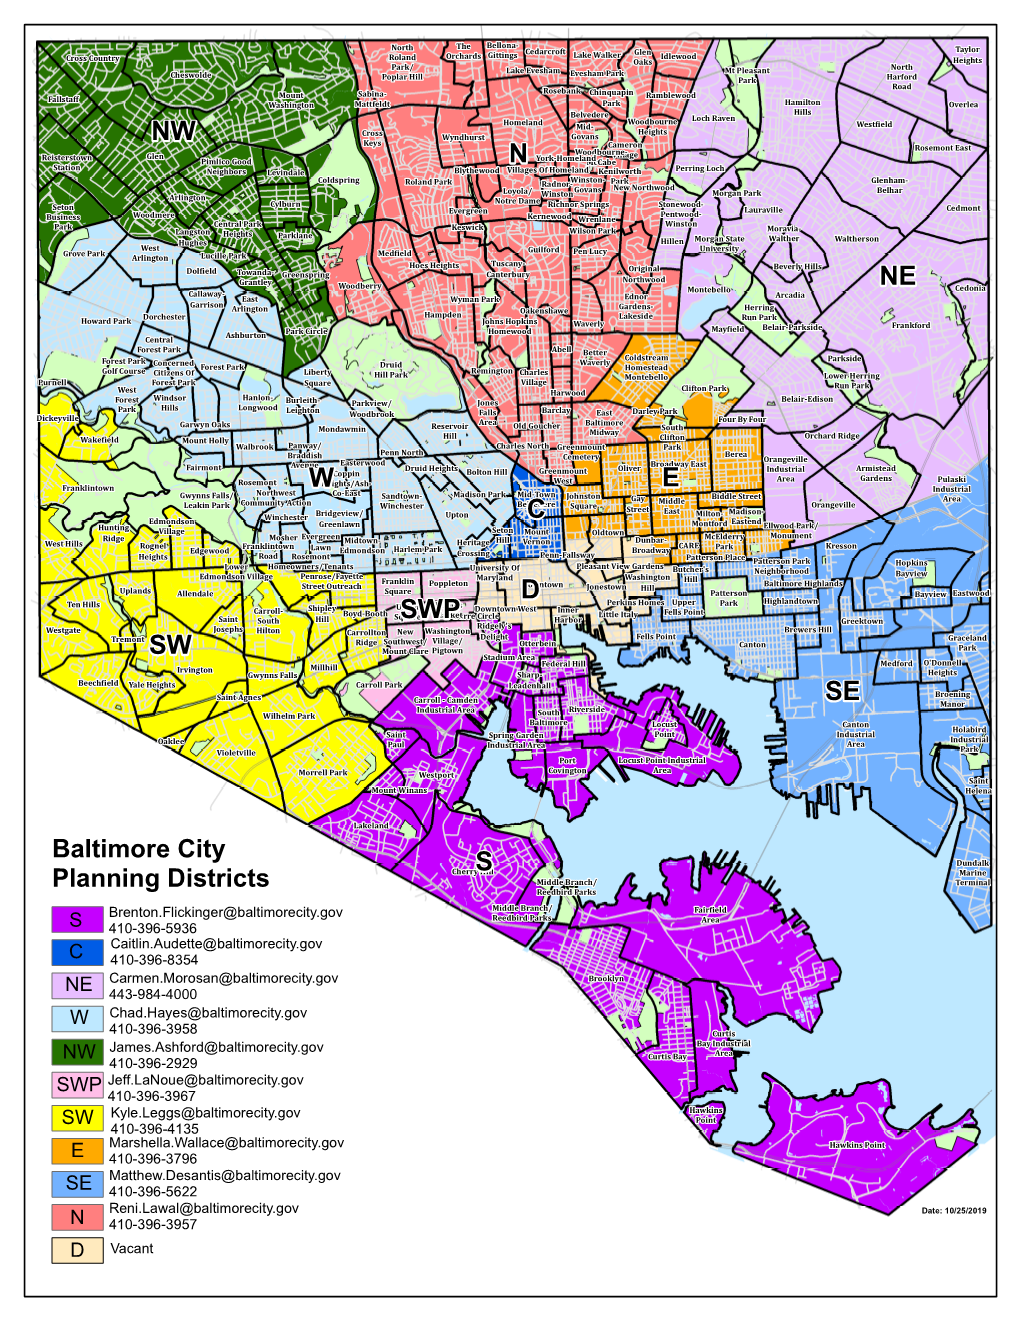 Baltimore City Planning Districts C D E NE SE S N W NW SW